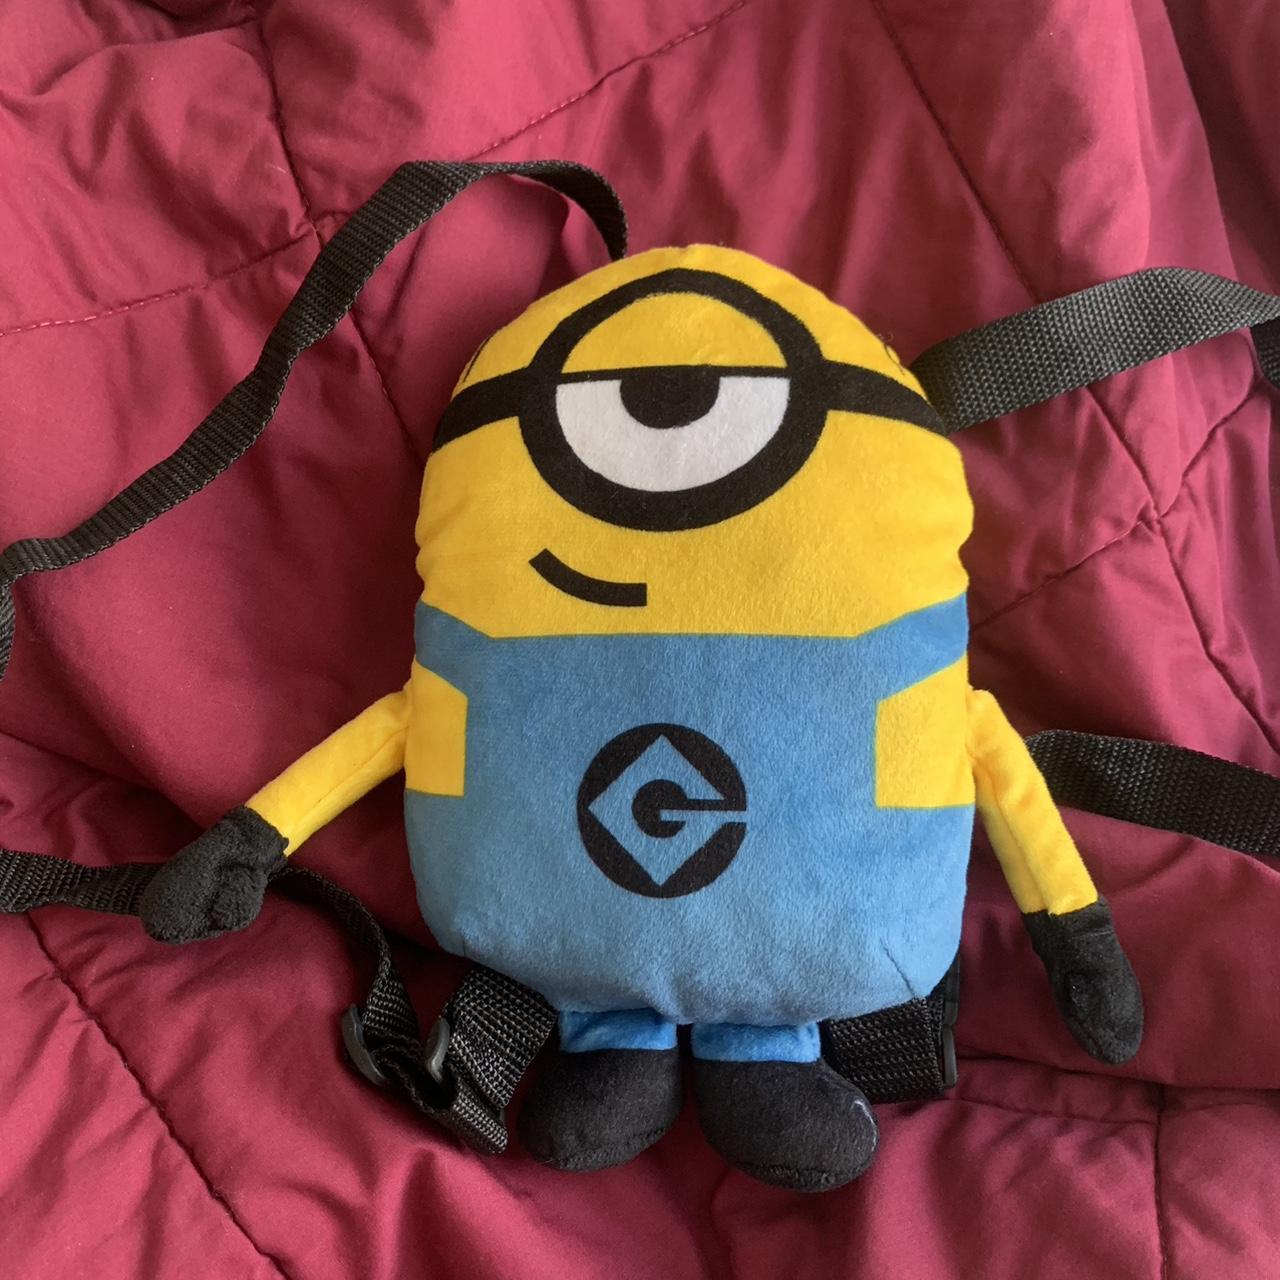 Despicable Me Minion Plush Backpack, admittedly does